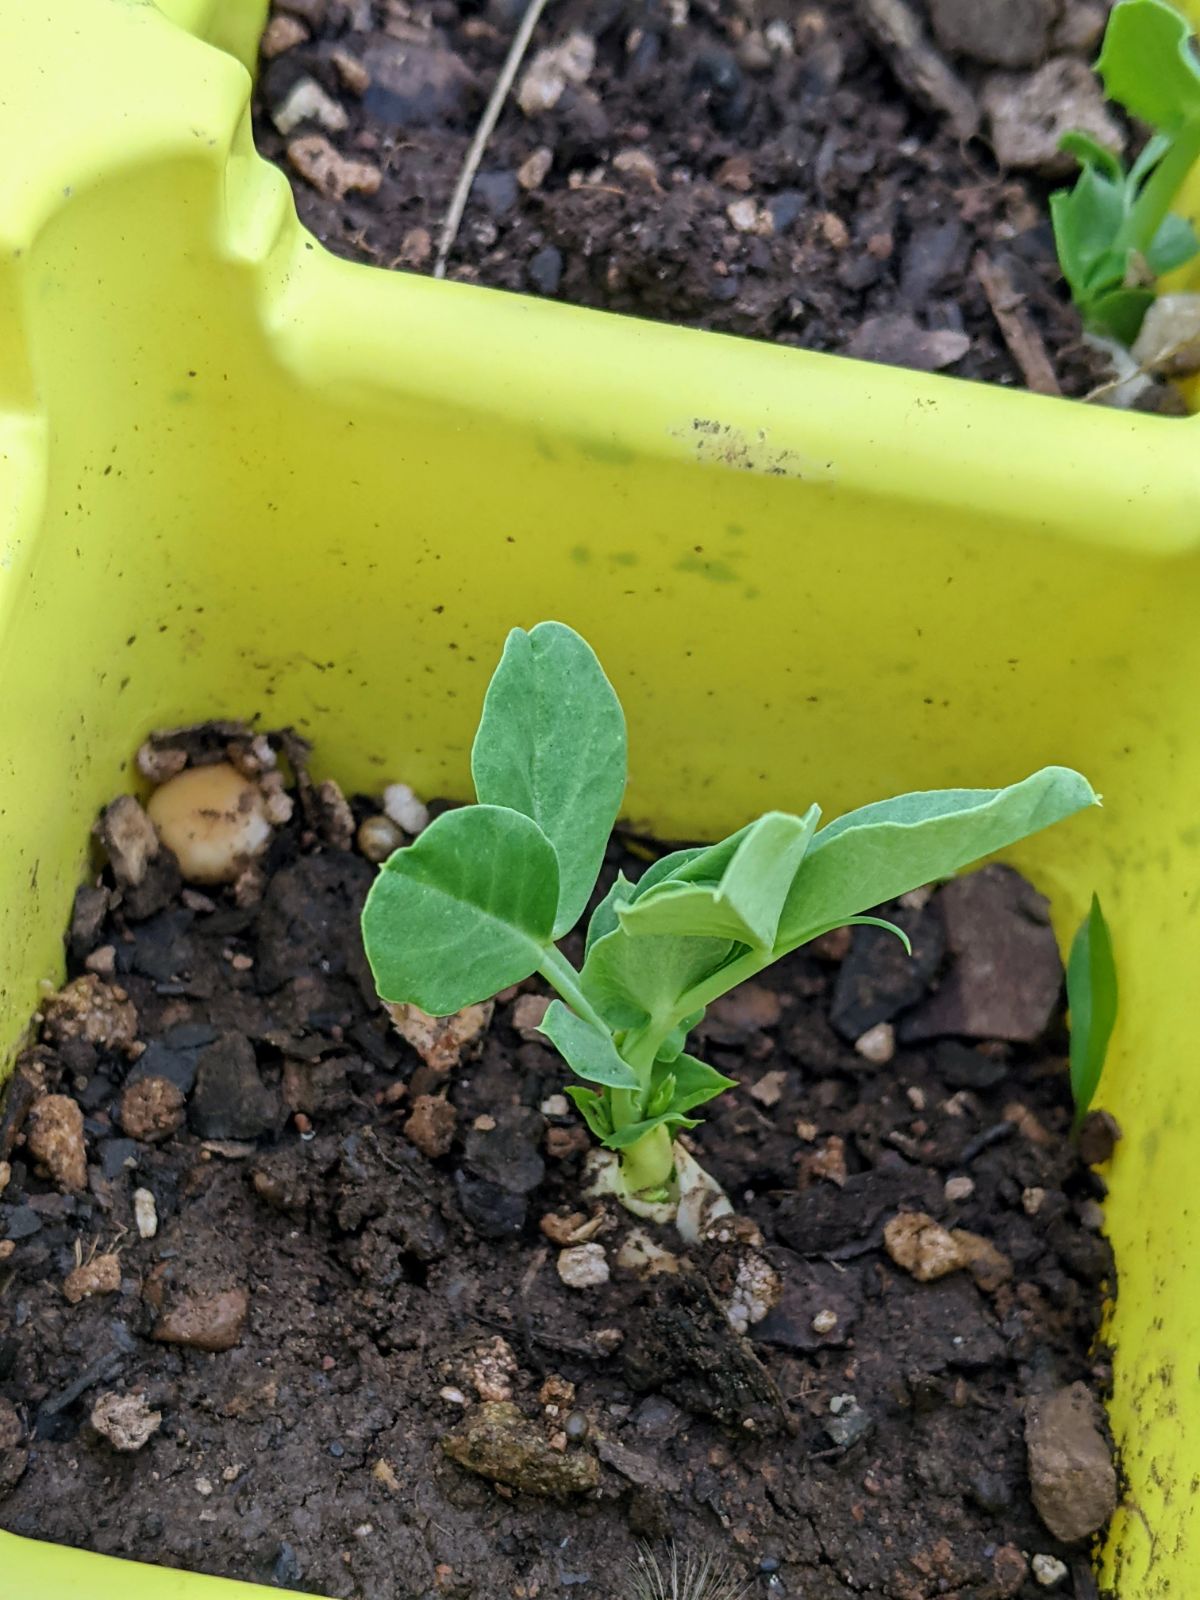 Snow pea seedling growing in a yellow container, ready for transplant